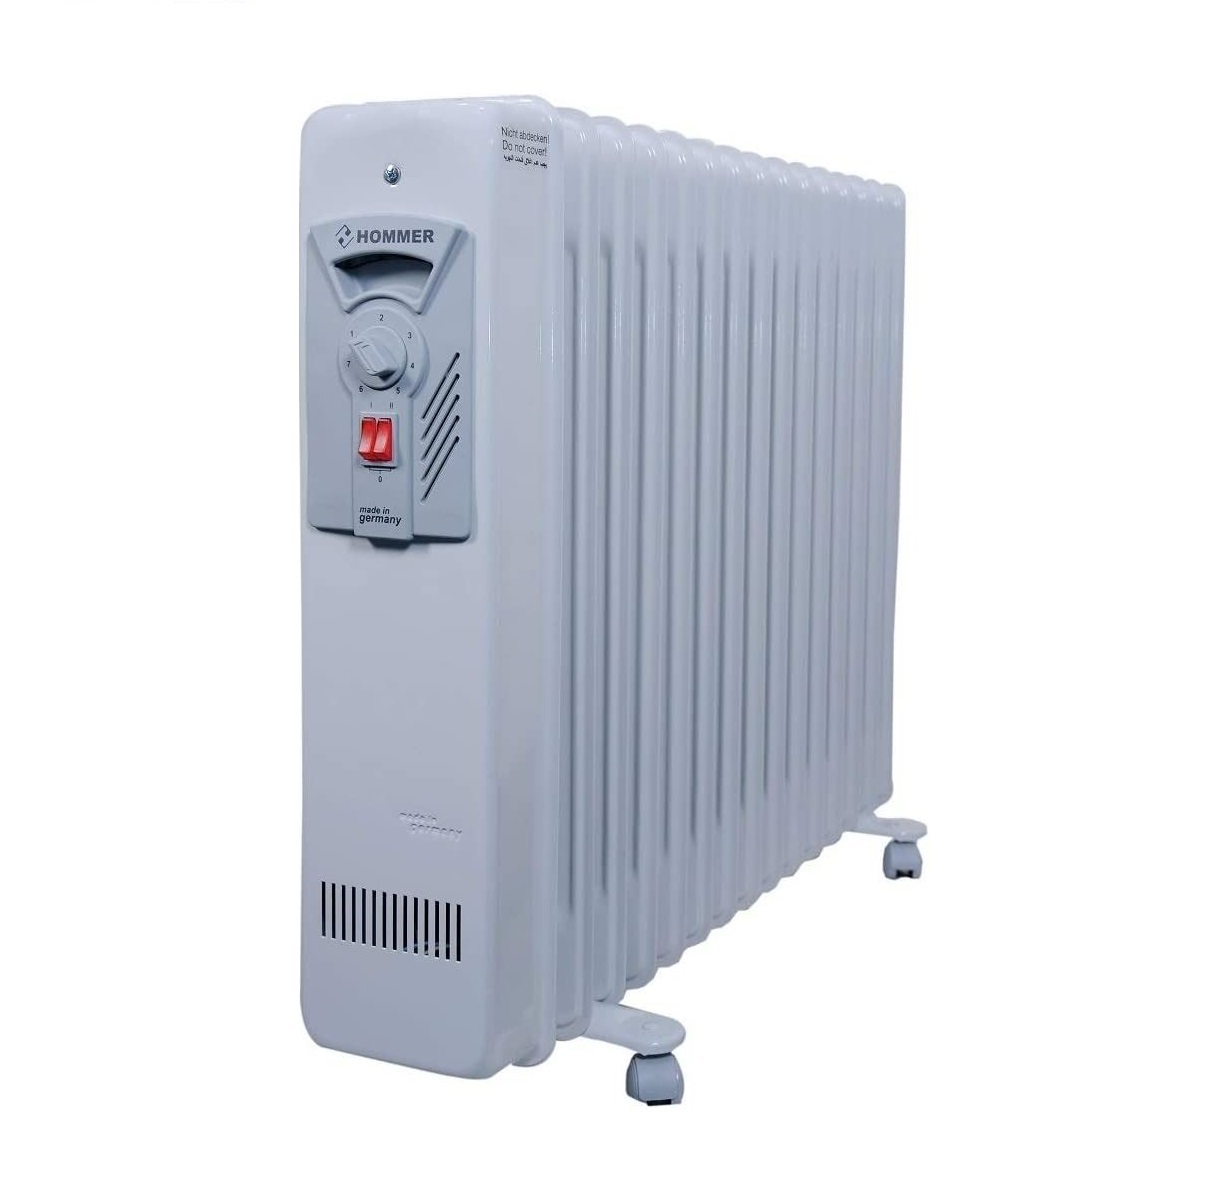 HOMMER Oil Heater 11 Fins, 2000W, Temperature Control, Ideal for Allergy sufferers, Made in Germany - HSA204-01